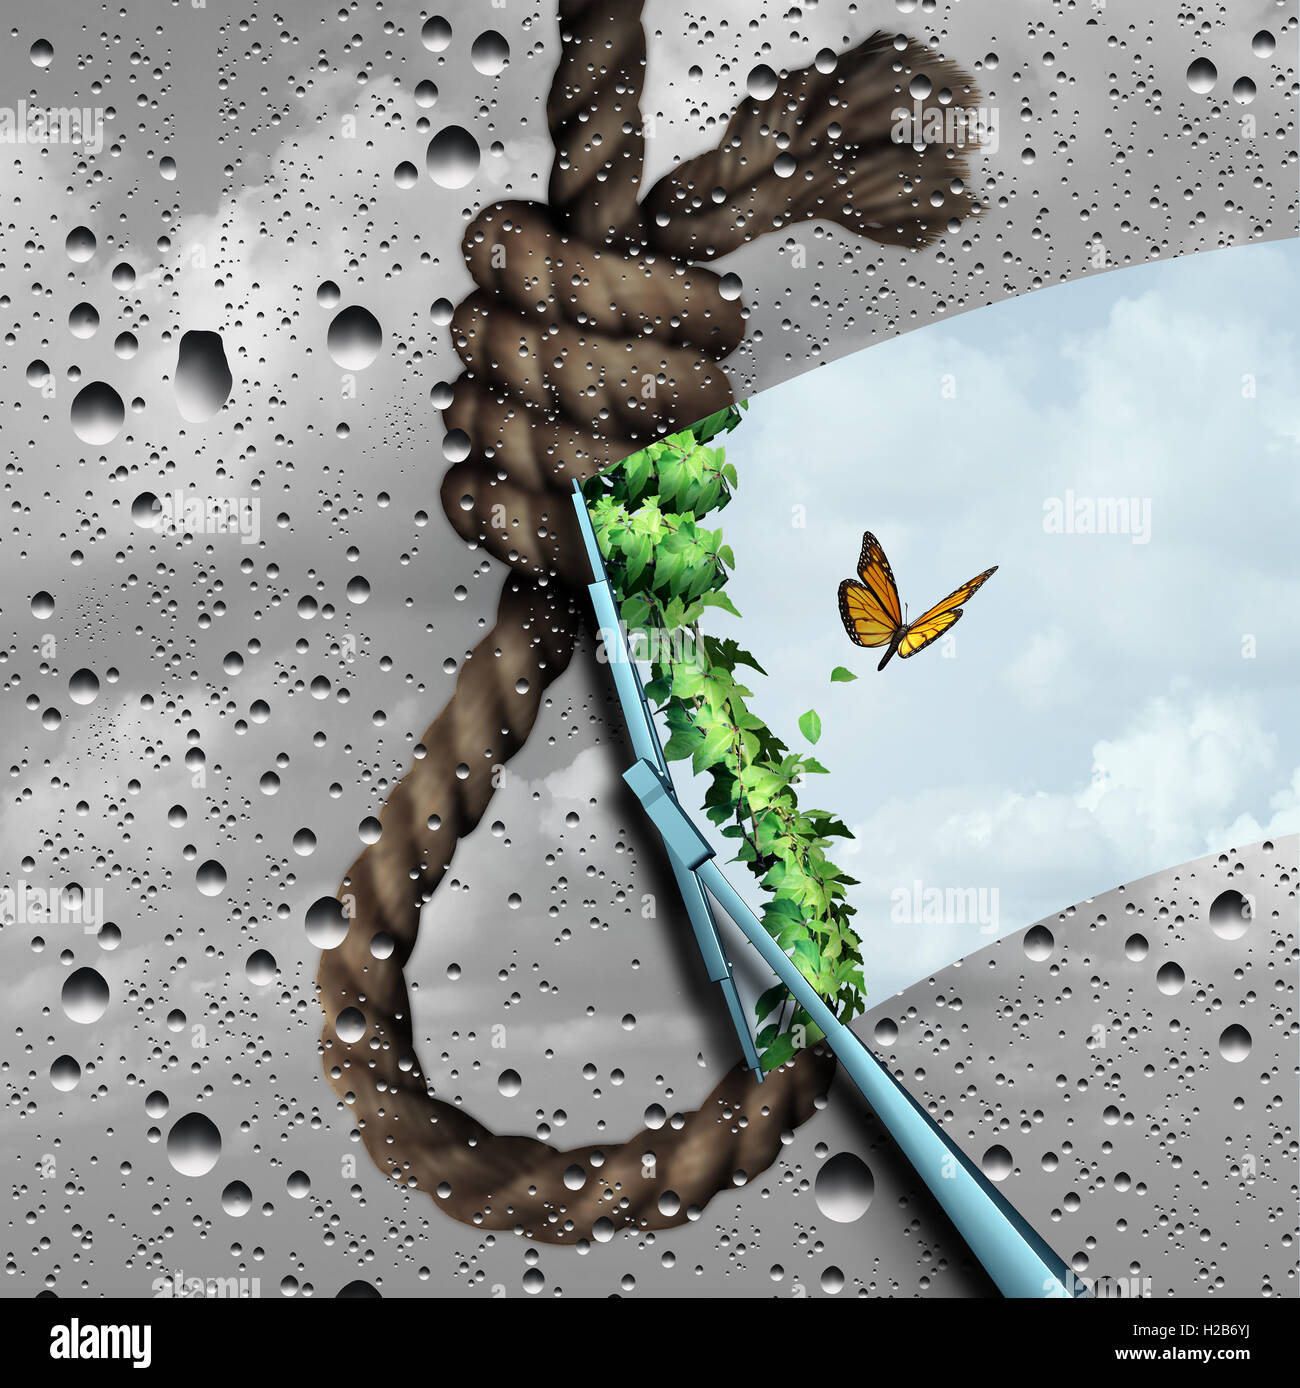 Concept of suicide prevention psychology therapy and psychiatrist or psychologist treatment to stop depressed suicidal people from ending thier lives as a wiper clearing a negative cloudy noose revealing bright positive future with 3D illustration element Stock Photo